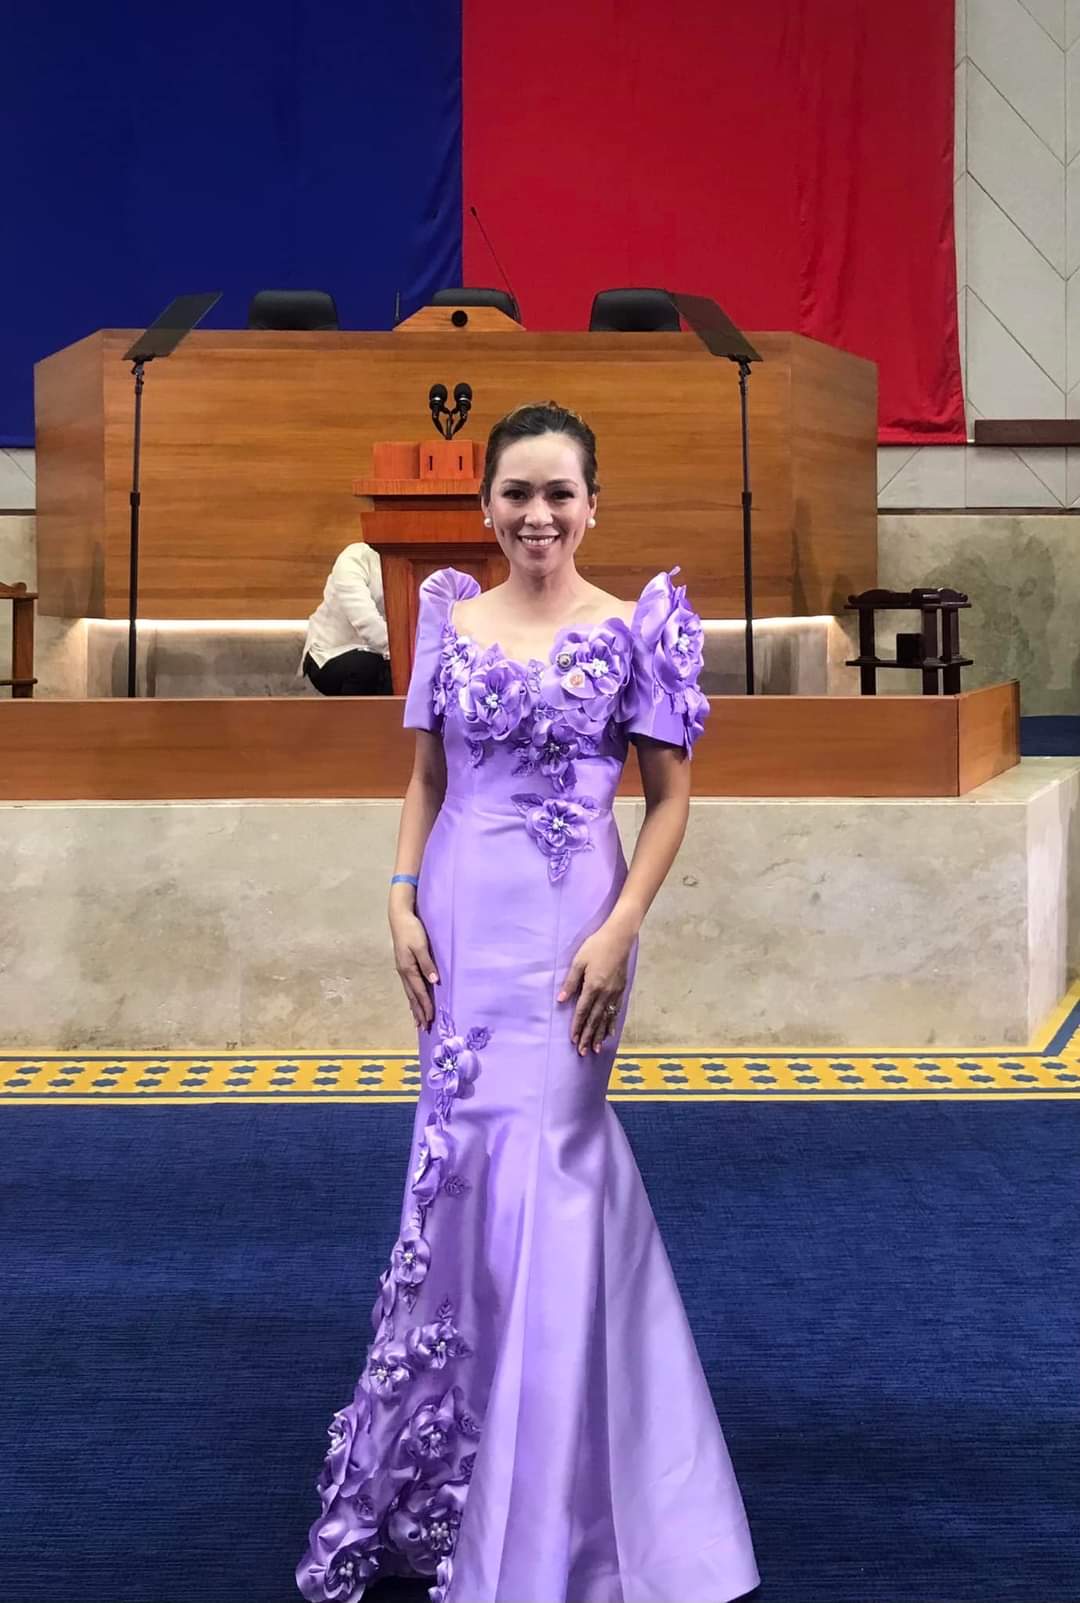 LOOK: Rep. Vanessa Aumentado proudly wears made in Bohol on Bongbong Marcos’ first Sona